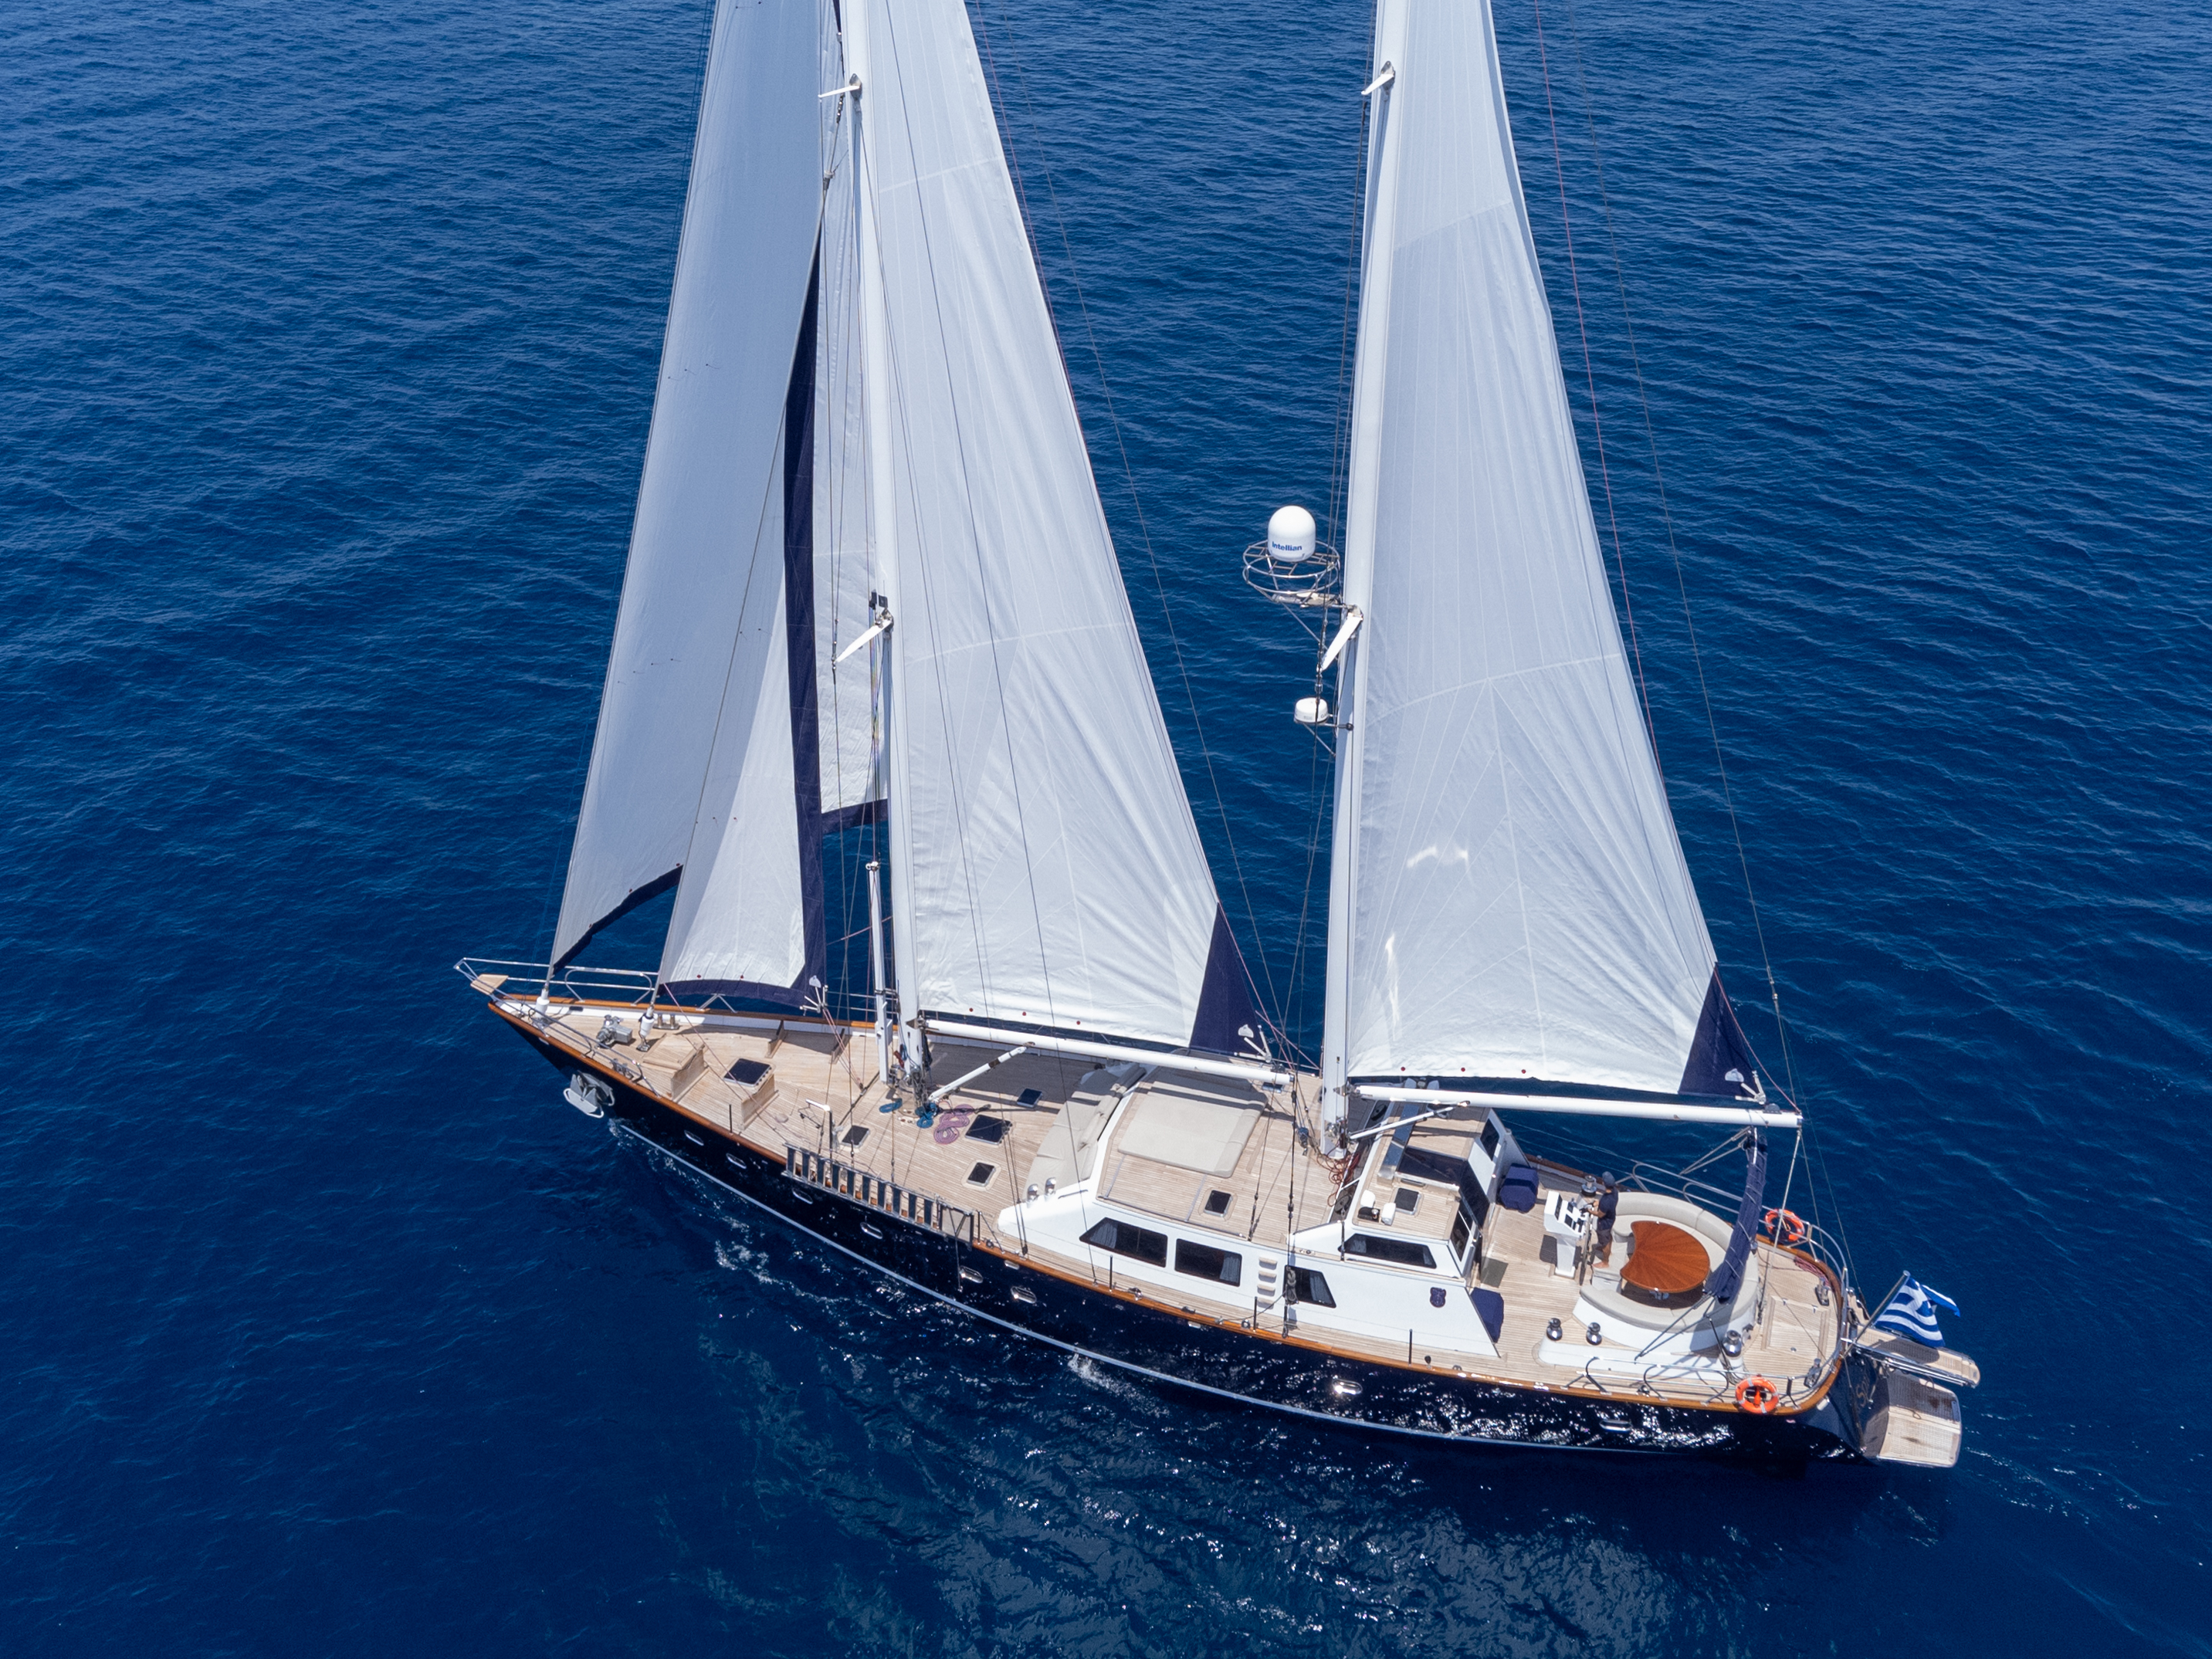 CCYD 85 - Superyacht charter worldwide & Boat hire in Greece Athens and Saronic Gulf Athens Piraeus Marina Zea 6